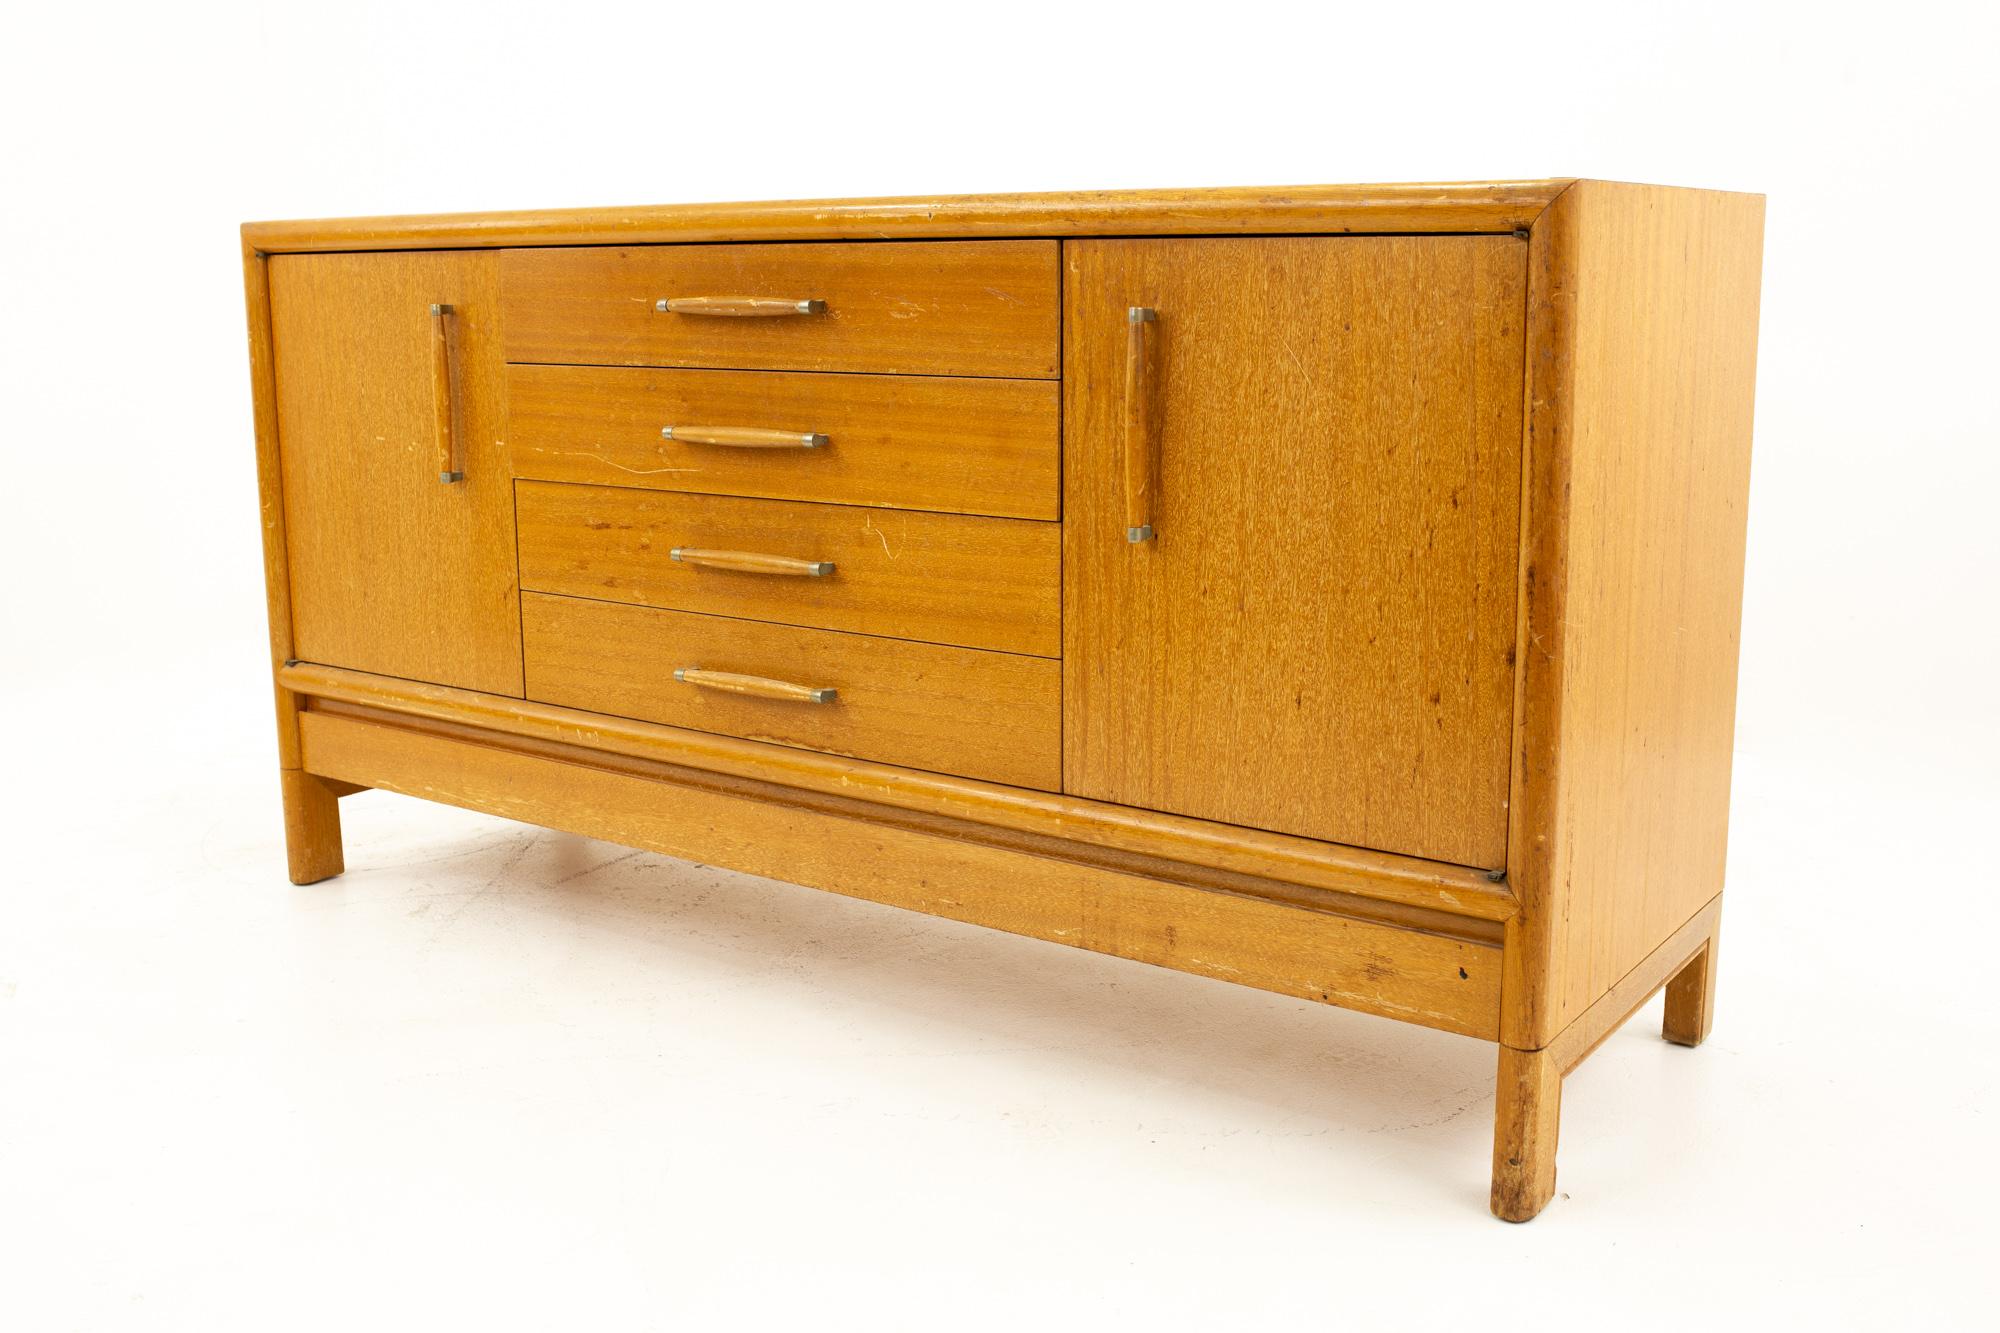 John Keal for Brown Saltman mahogany mid century credenza.
Credenza measures: 66 wide x 20 deep x 33 high

All pieces of furniture can be had in what we call restored vintage condition. That means the piece is restored upon purchase so it’s free